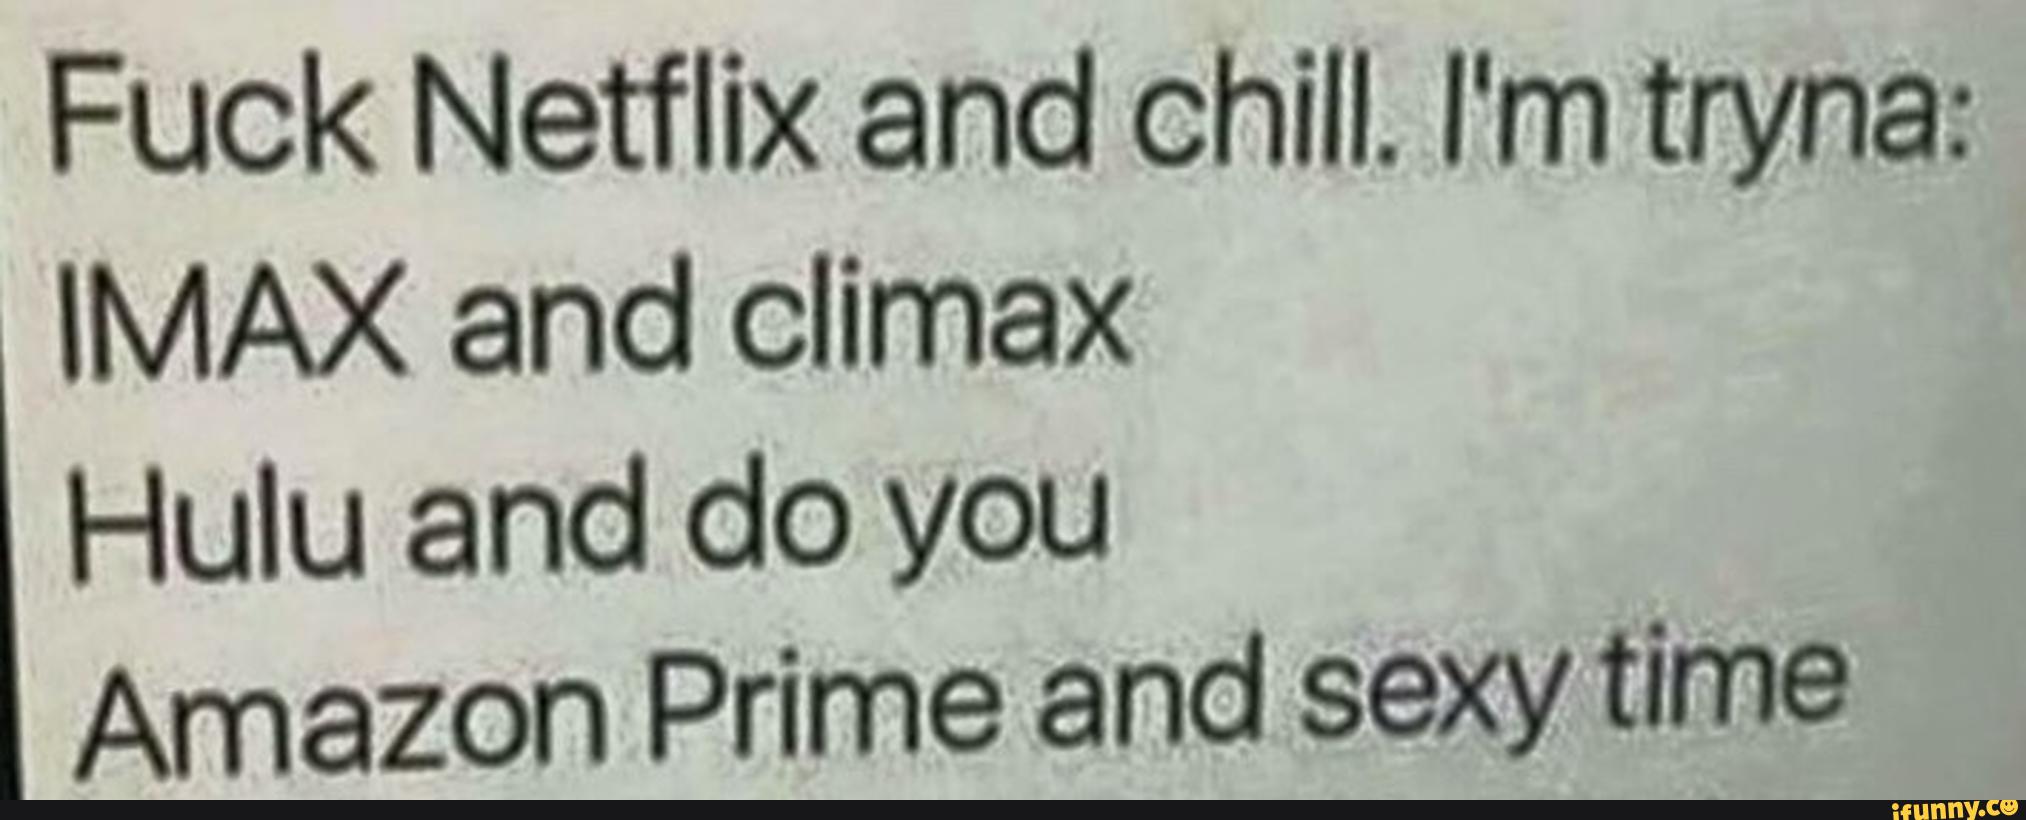 Fuck Netflix And Chill I M Tryna Imax And Climax Hulu And Do You Amazon Prime And Sexy Time Ifunny